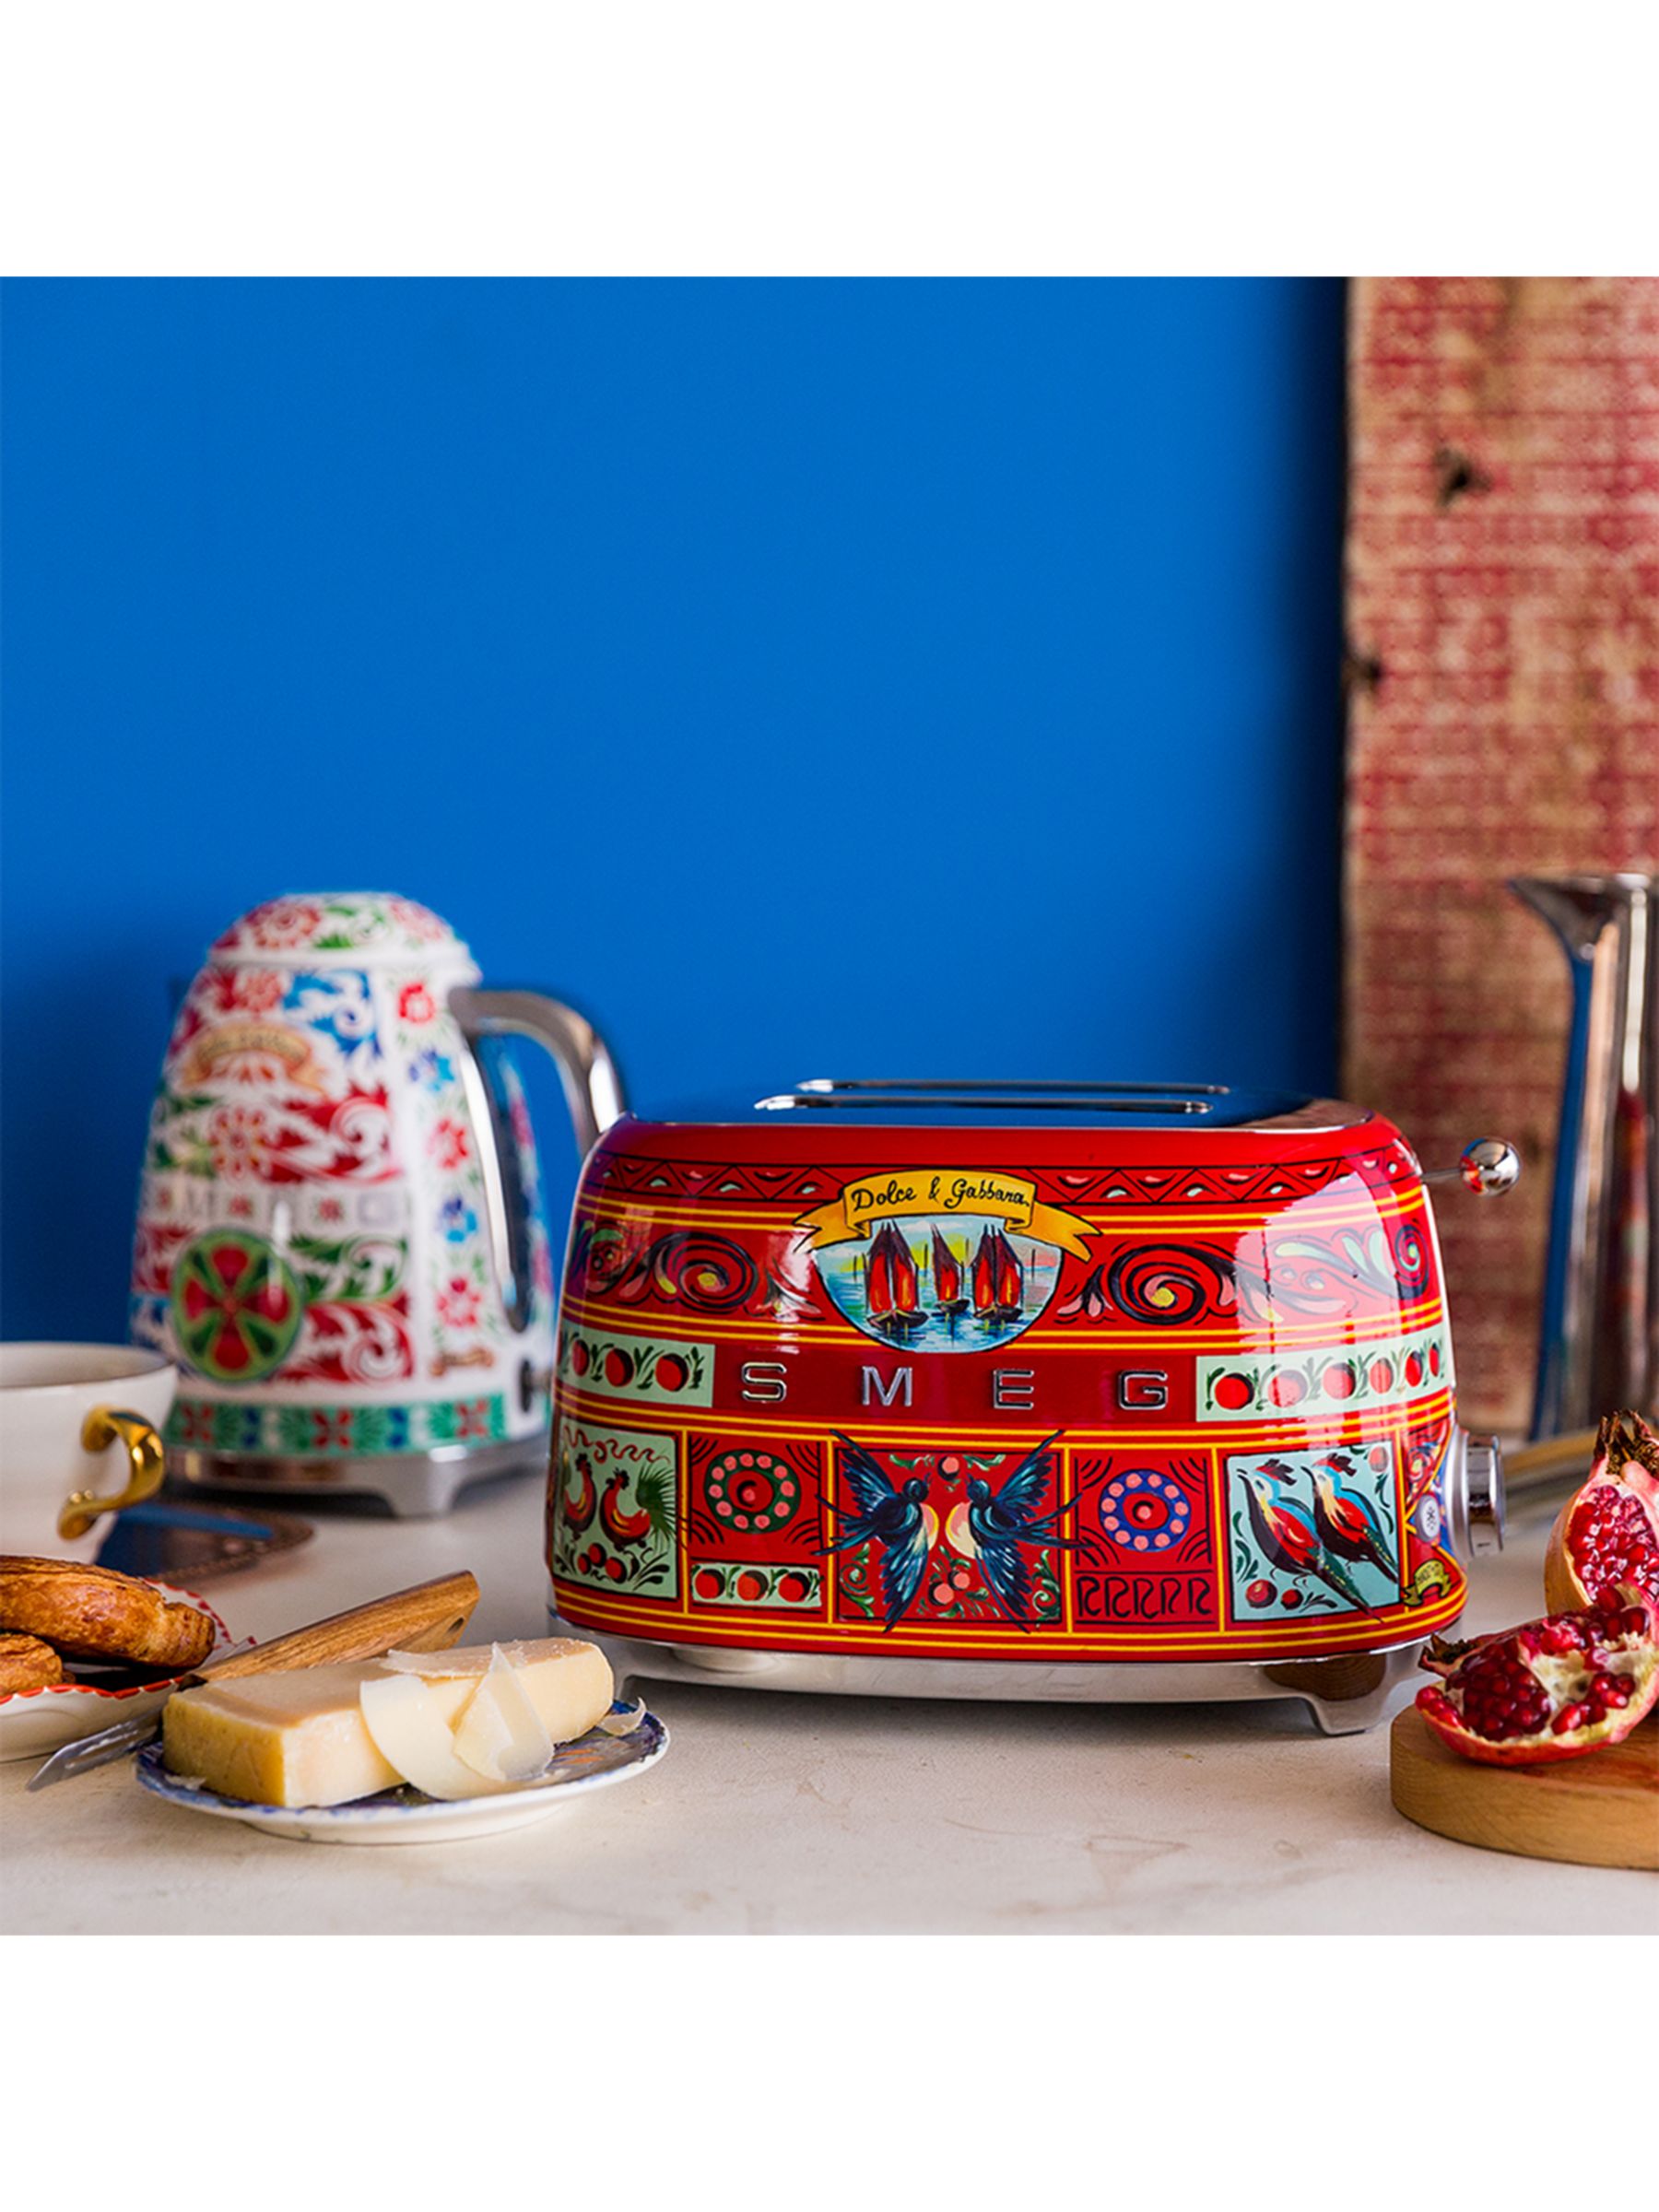 dolce and gabbana toaster and kettle